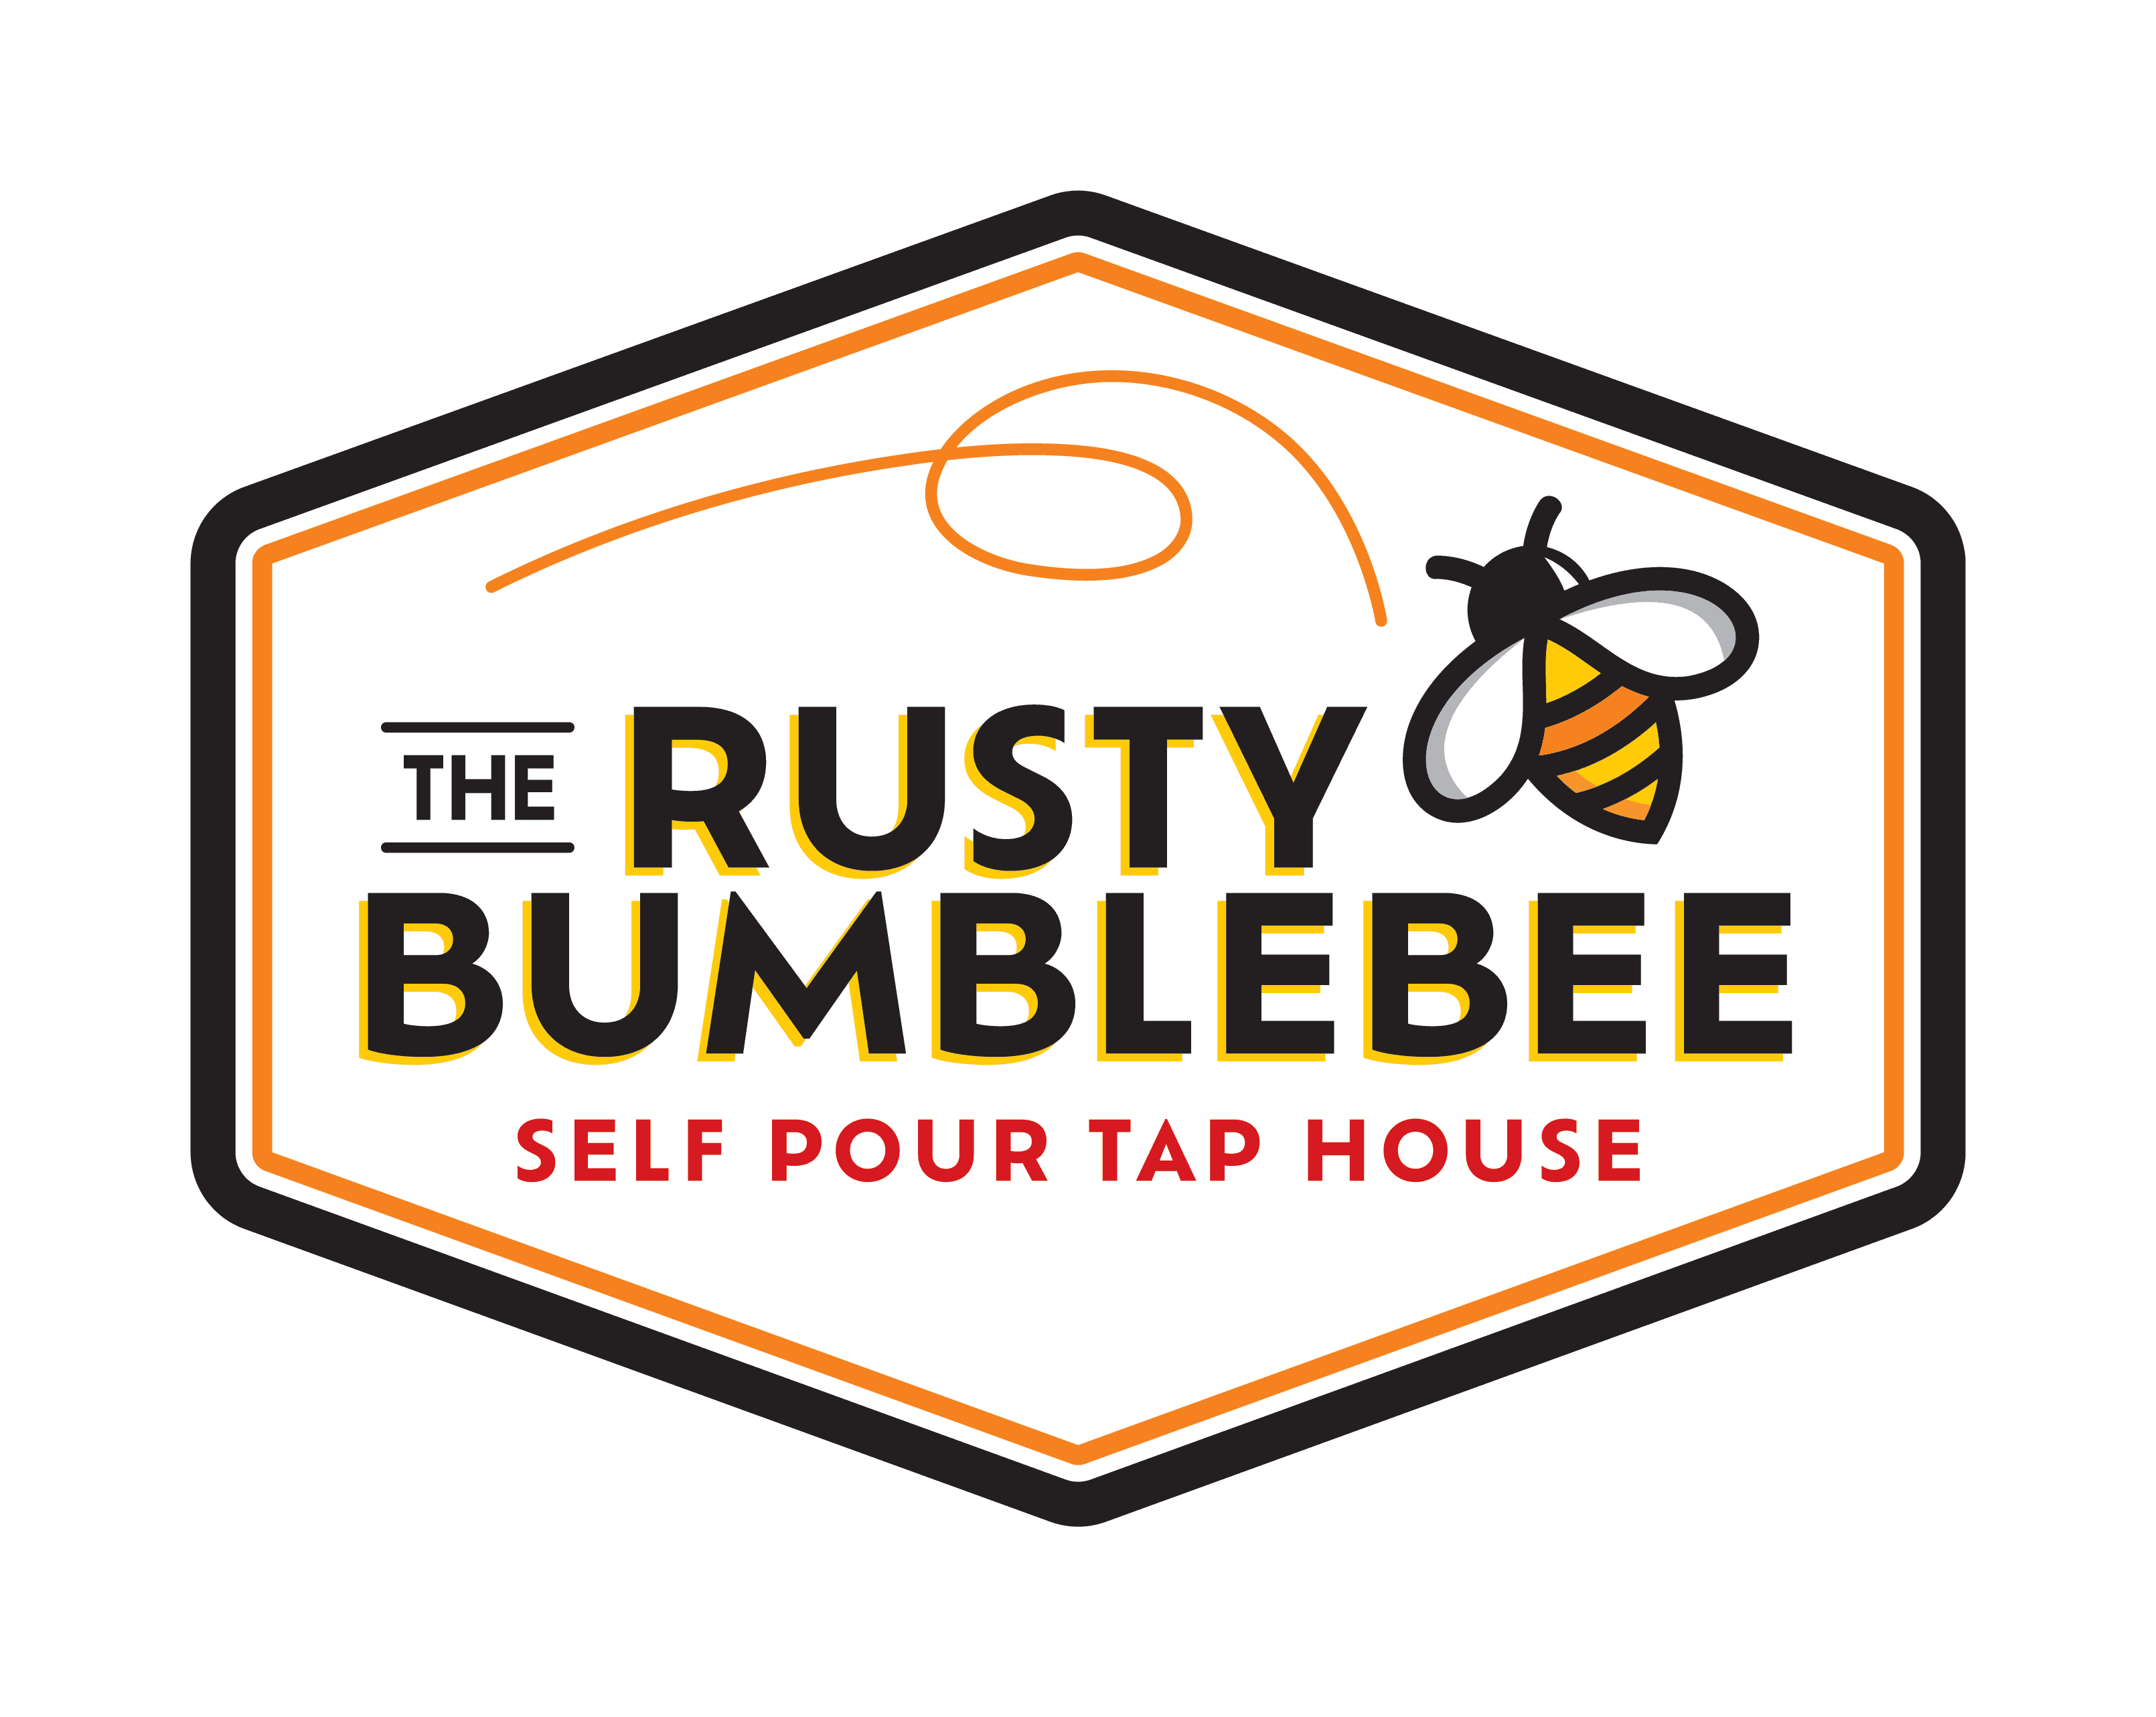 The Rusty Bumblebee self pour tap house logo